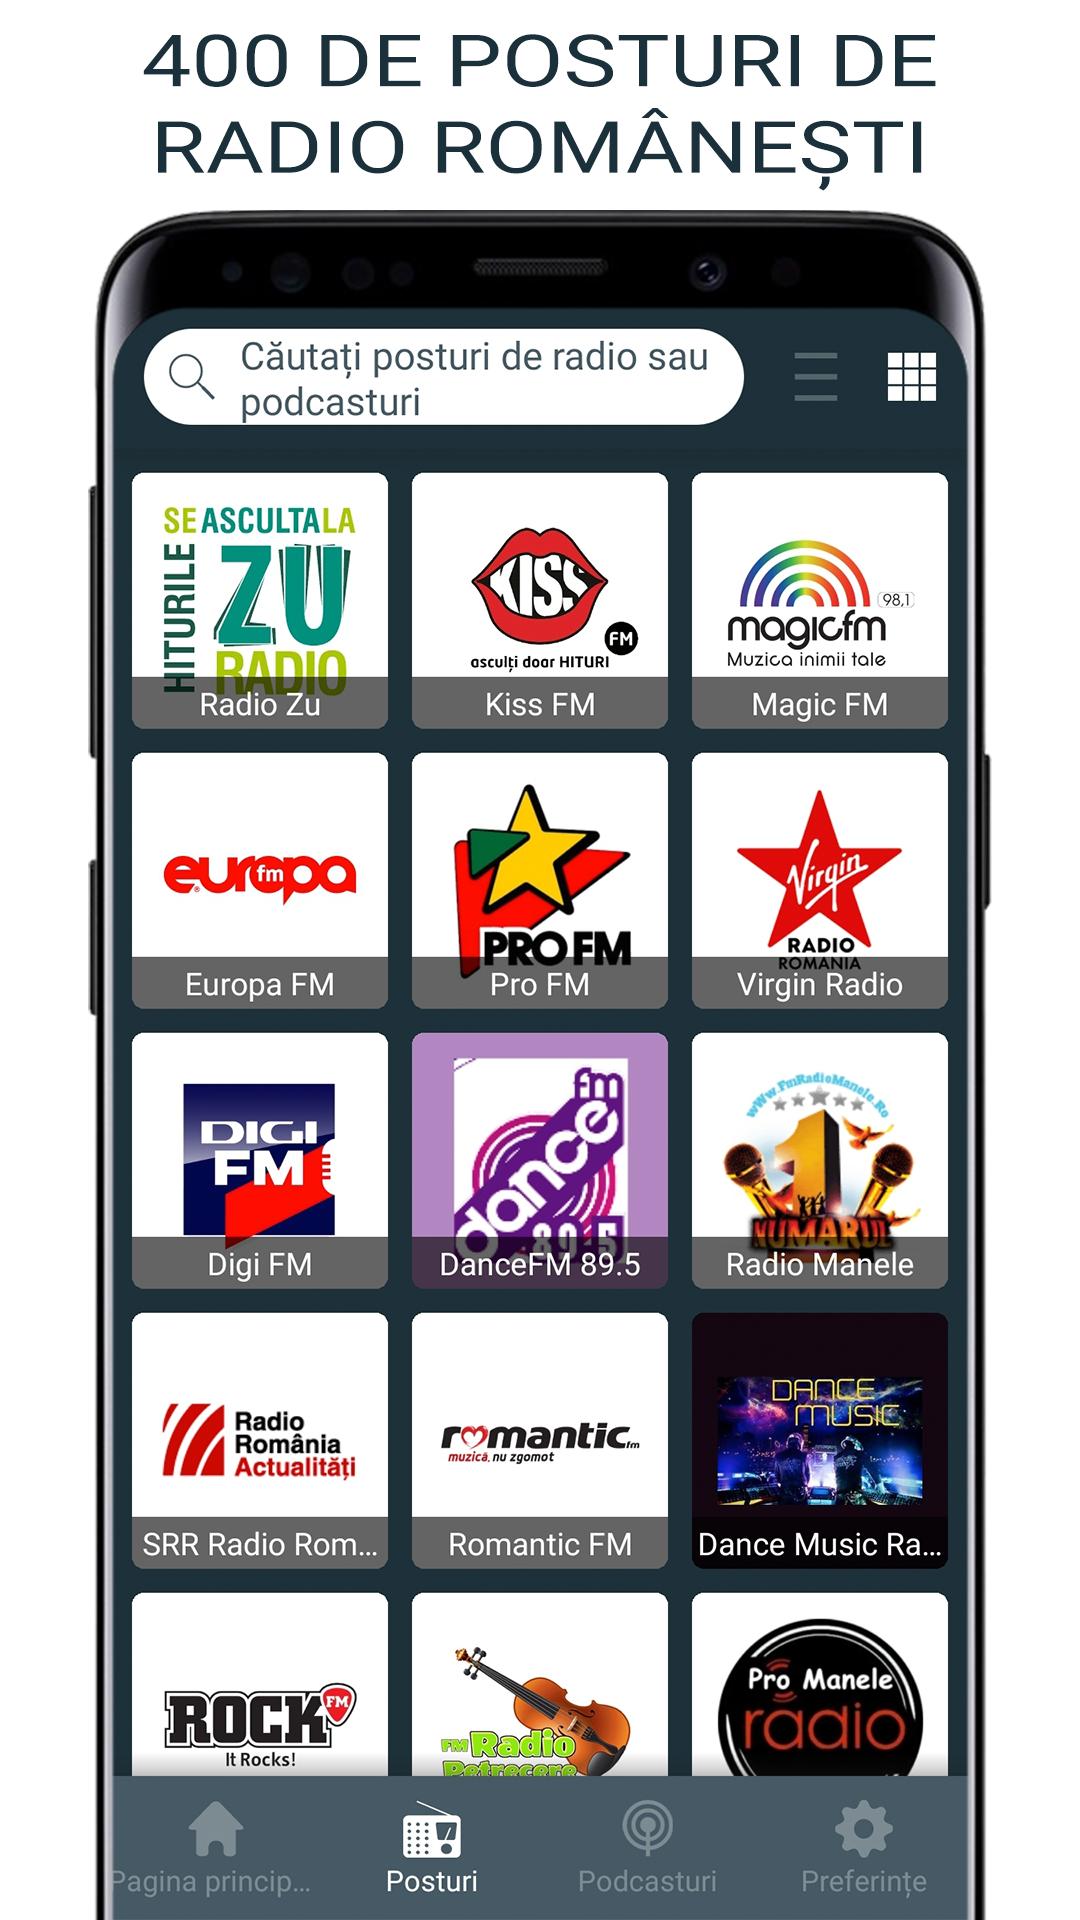 Radio Online România for Android - APK Download